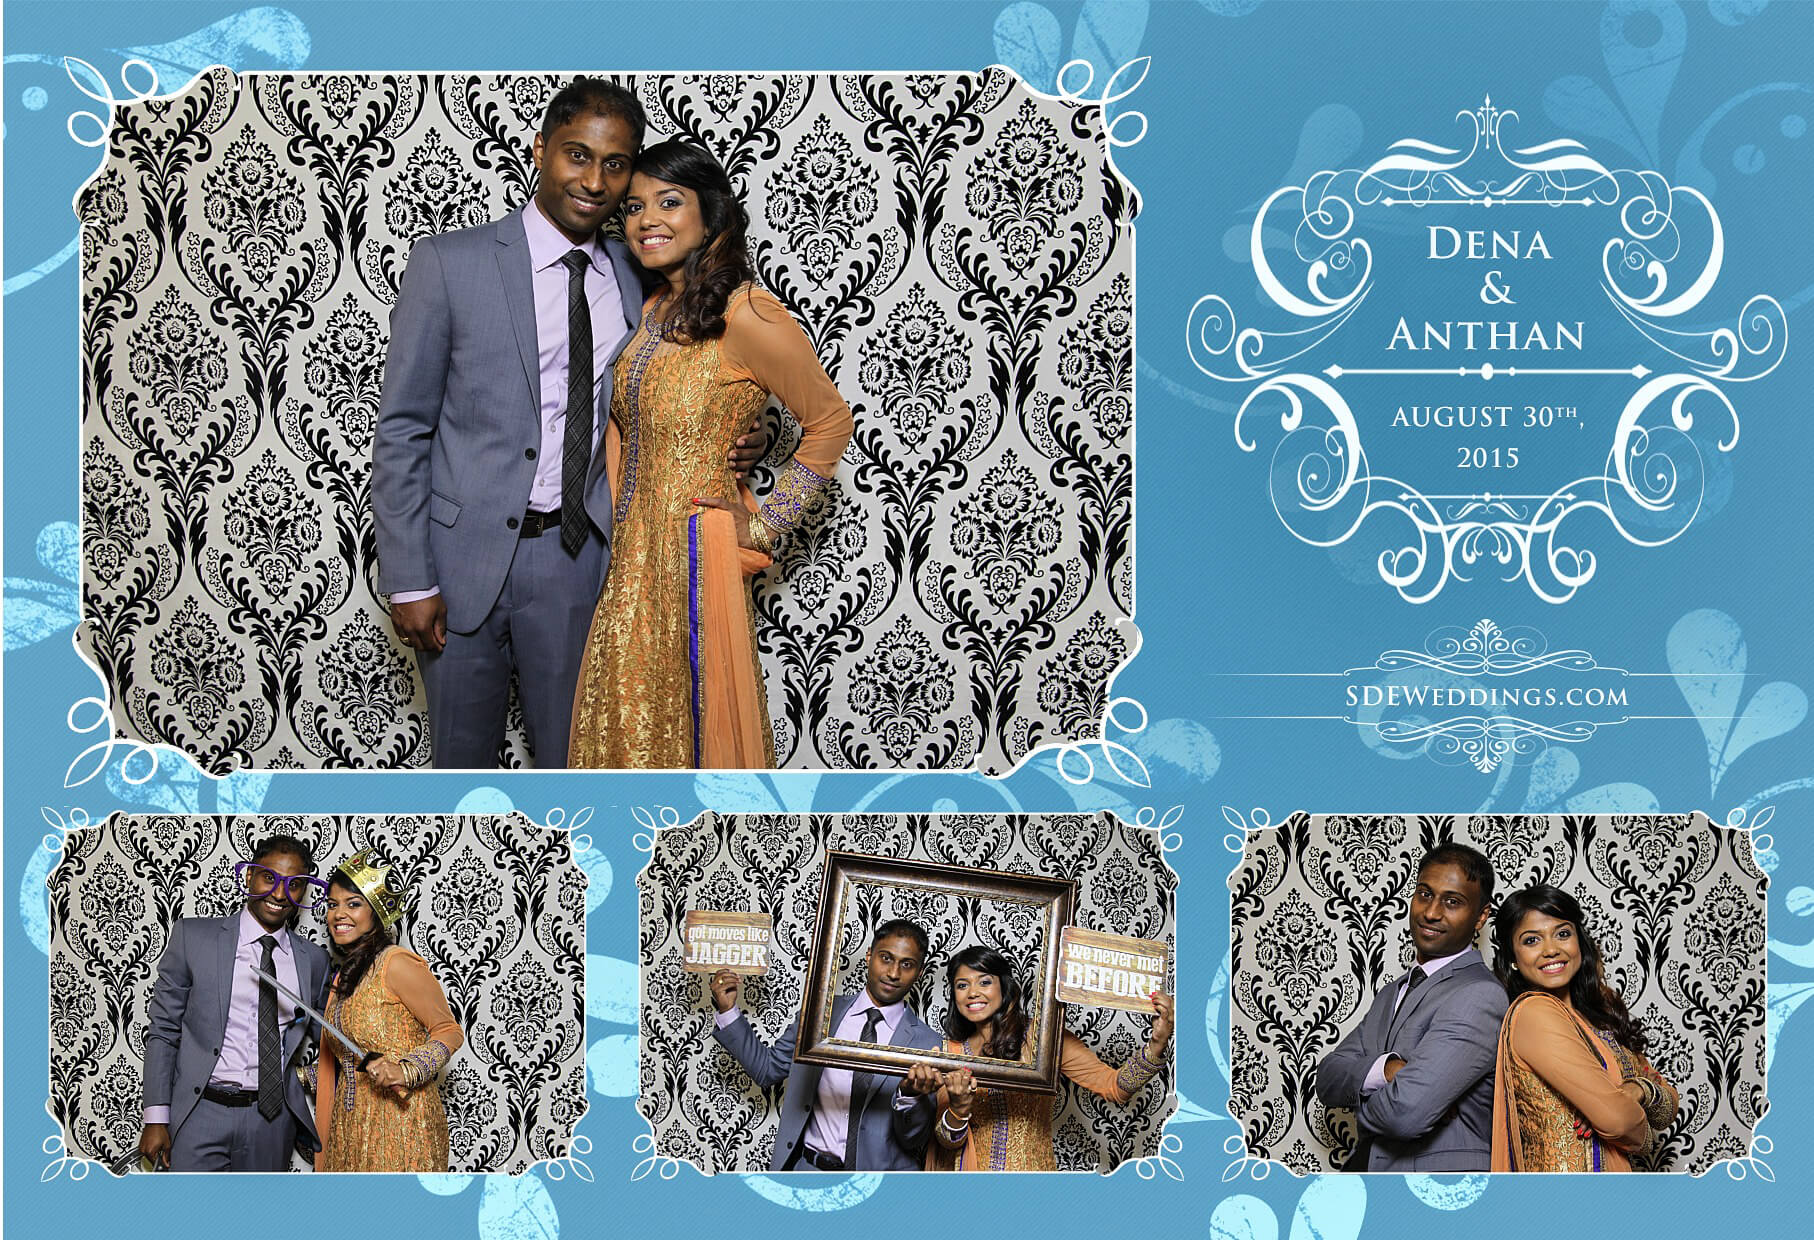 Toronto Photo Booth Rental at Peter and Paul Banquet Hall 8